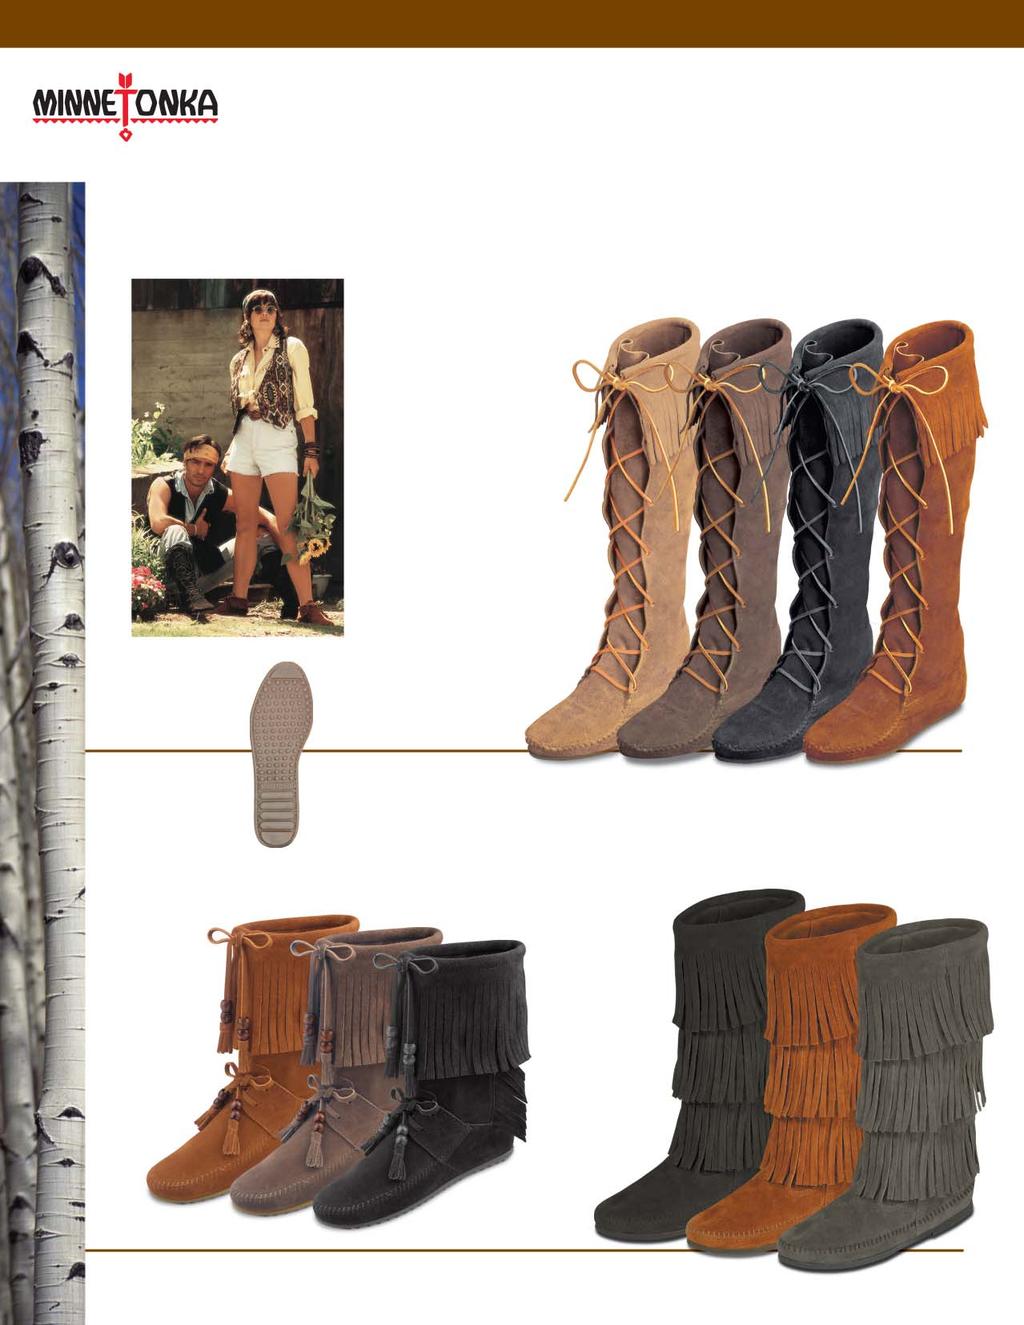 More than just boots - our fringe boots feature authentic designs that become a part of you. In natural suedes and genuine moccasin soul.